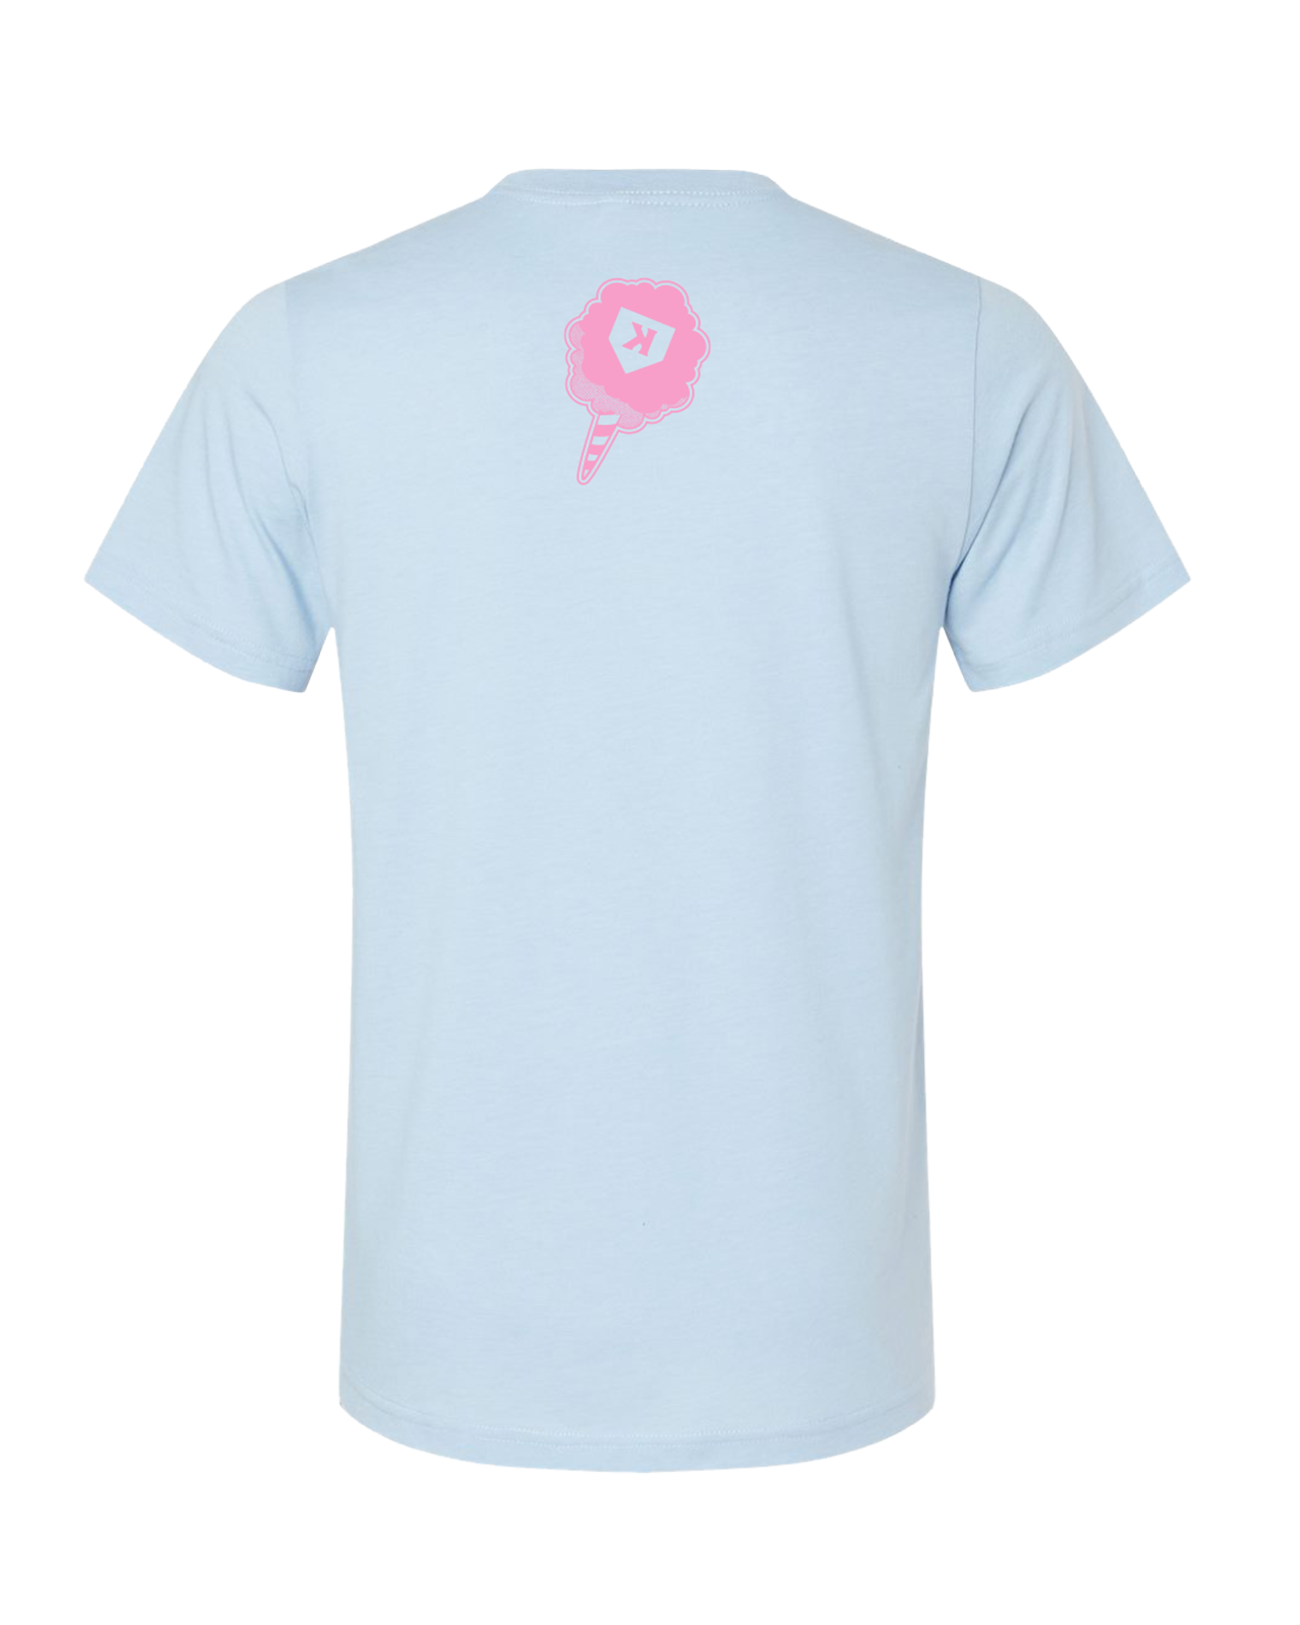 Cotton Candy Blue Tee